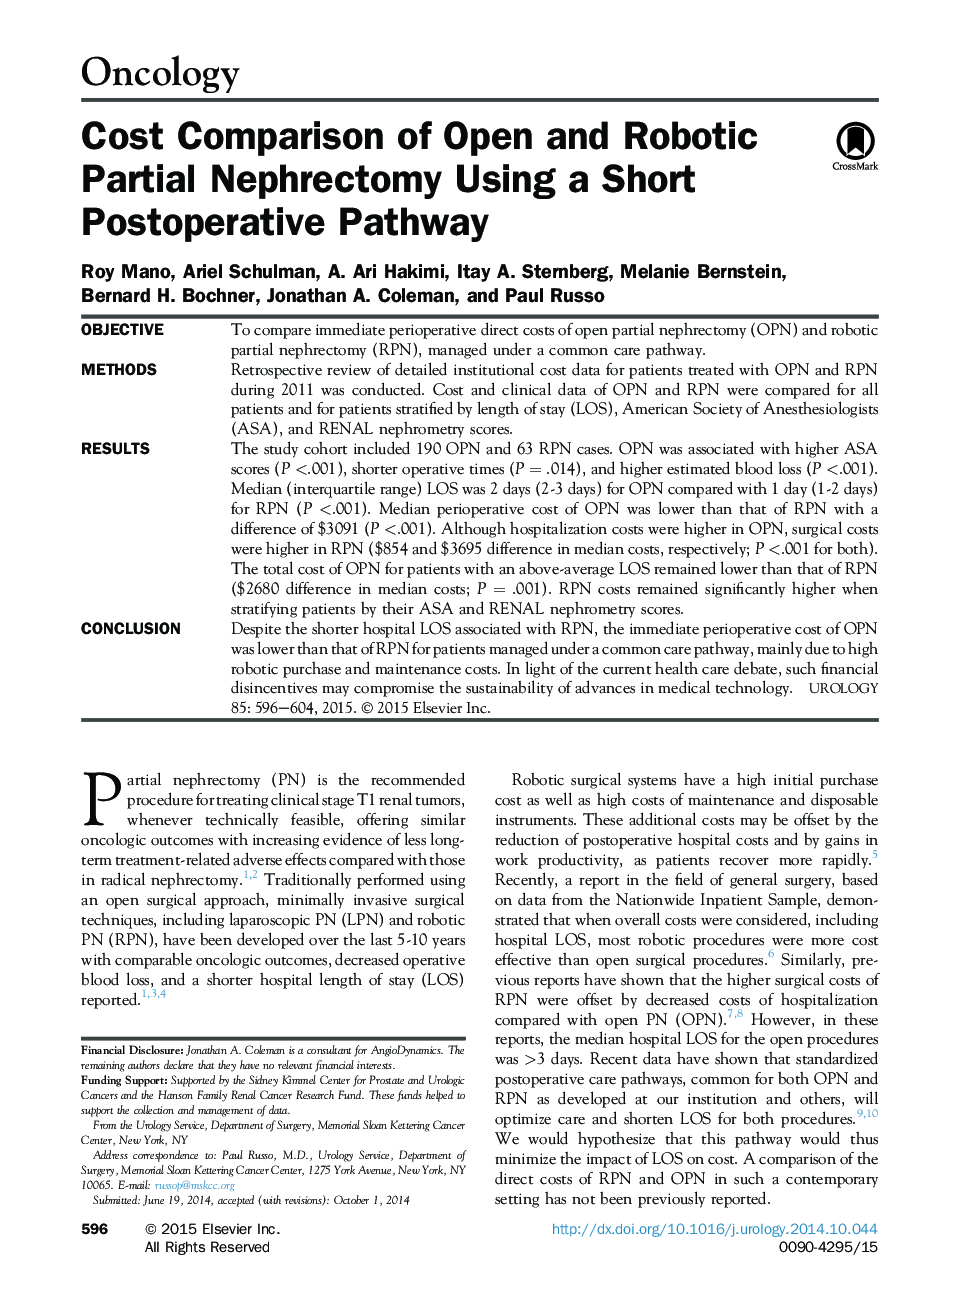 Cost Comparison of Open and Robotic Partial Nephrectomy Using a Short Postoperative Pathway